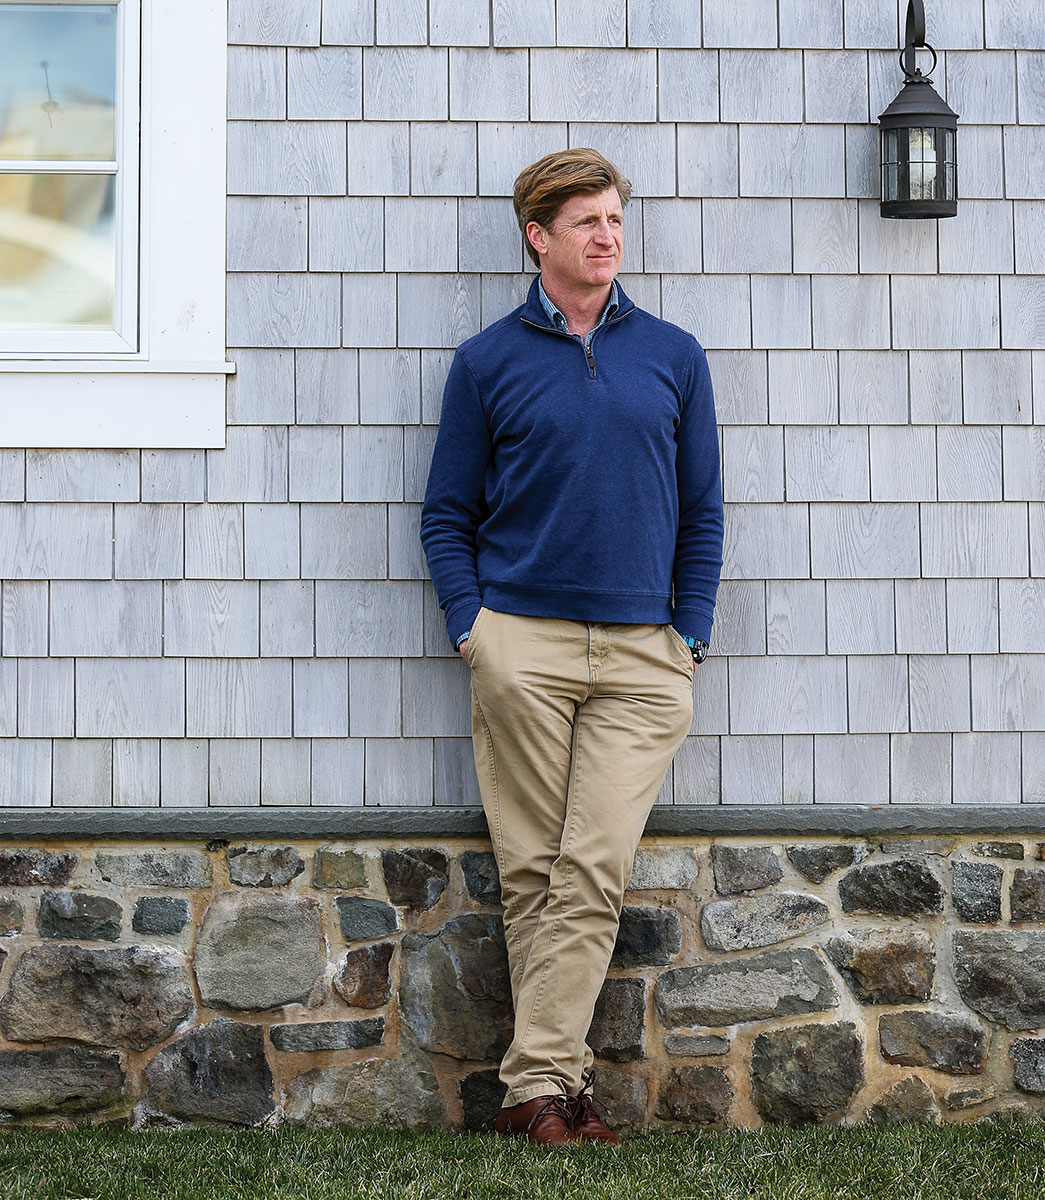 Patrick J. Kennedy '91 chose Providence College because a family friend said it would be "a fresh start in a smaller fishbowl."